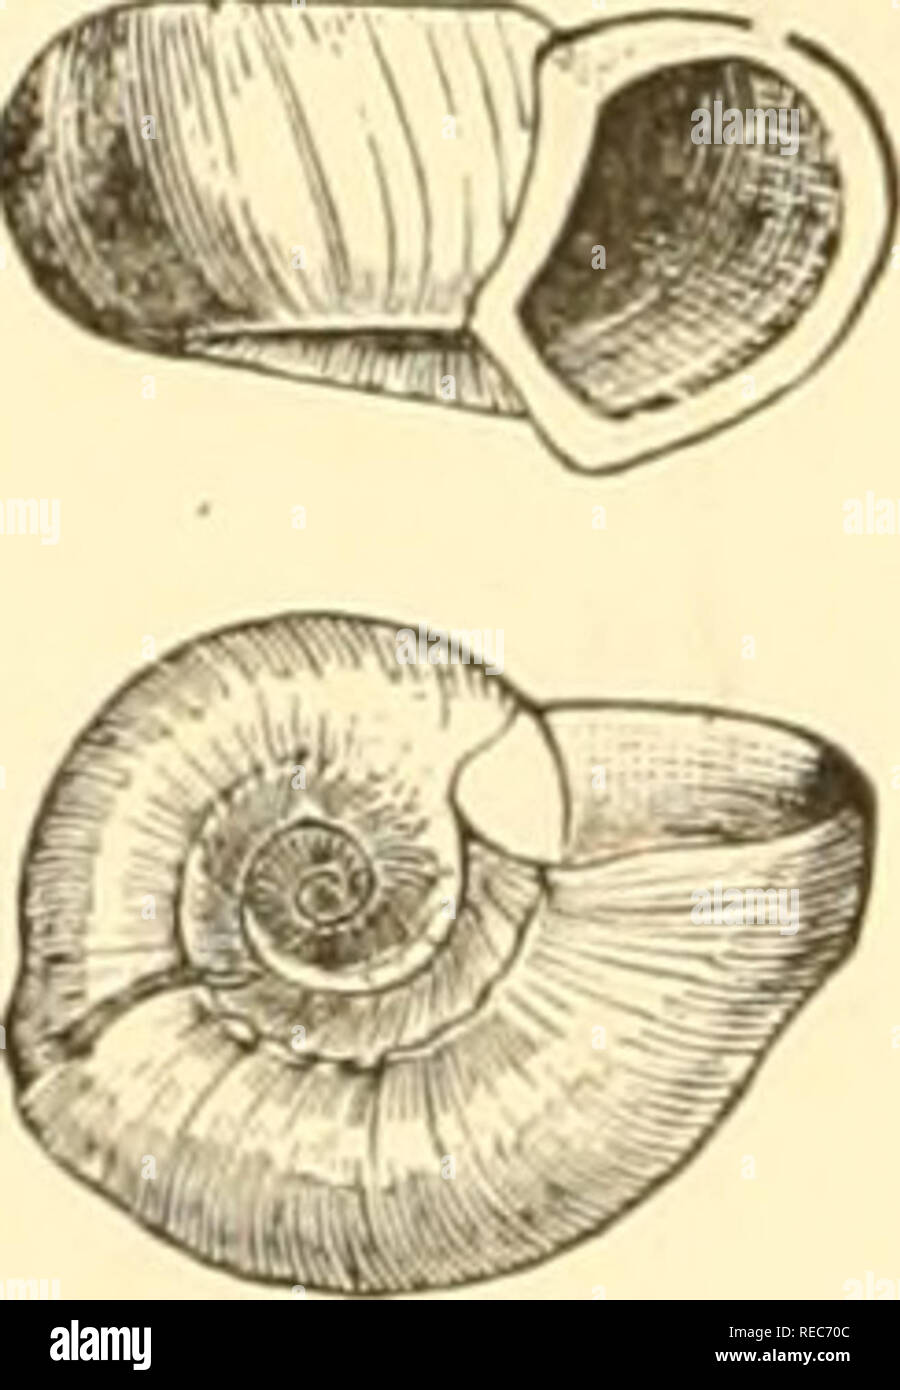 . Conchologia cestrica. The molluscous animals and their shells, of Chester county, Pa. Mollusks. Shell, thin, translucent, carinate below; umbilicus very shallow; whorls 3, obsolete-striate; lip acute, margined; aperture ovate. H. 7, W. 13-IO, mill. Station, Schuylkill River, Chester County. H. bicnrinata [W. G. B.] Pig. 140, H. bicarinata, Say. Planorbis bicarinatus, Say, Nich. Encyc, Amer. Ed., 1816. Shell, pale brownish-yellow; whorls 3, carinate on both sides ; aperture large ; lip sub-revolute, arched above and below; within chestnut, with two arched lines an- swering to the carina. H. 6 Stock Photo